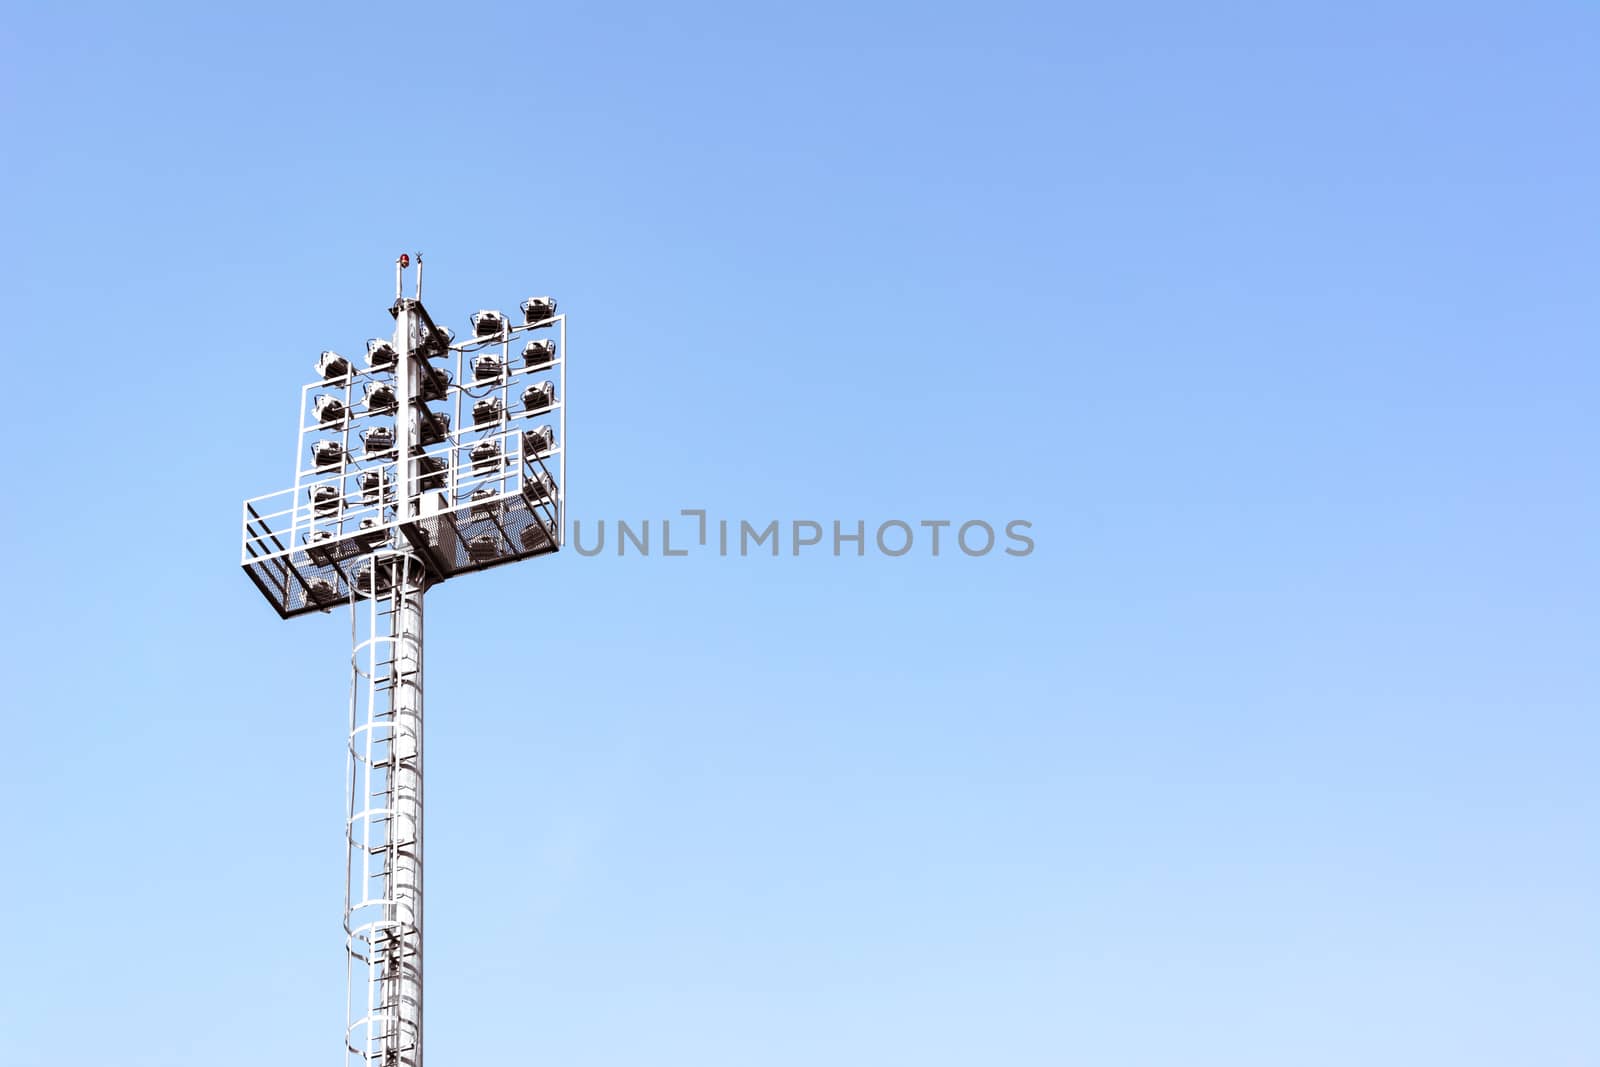 Stadium lights with sky for background by ahimaone